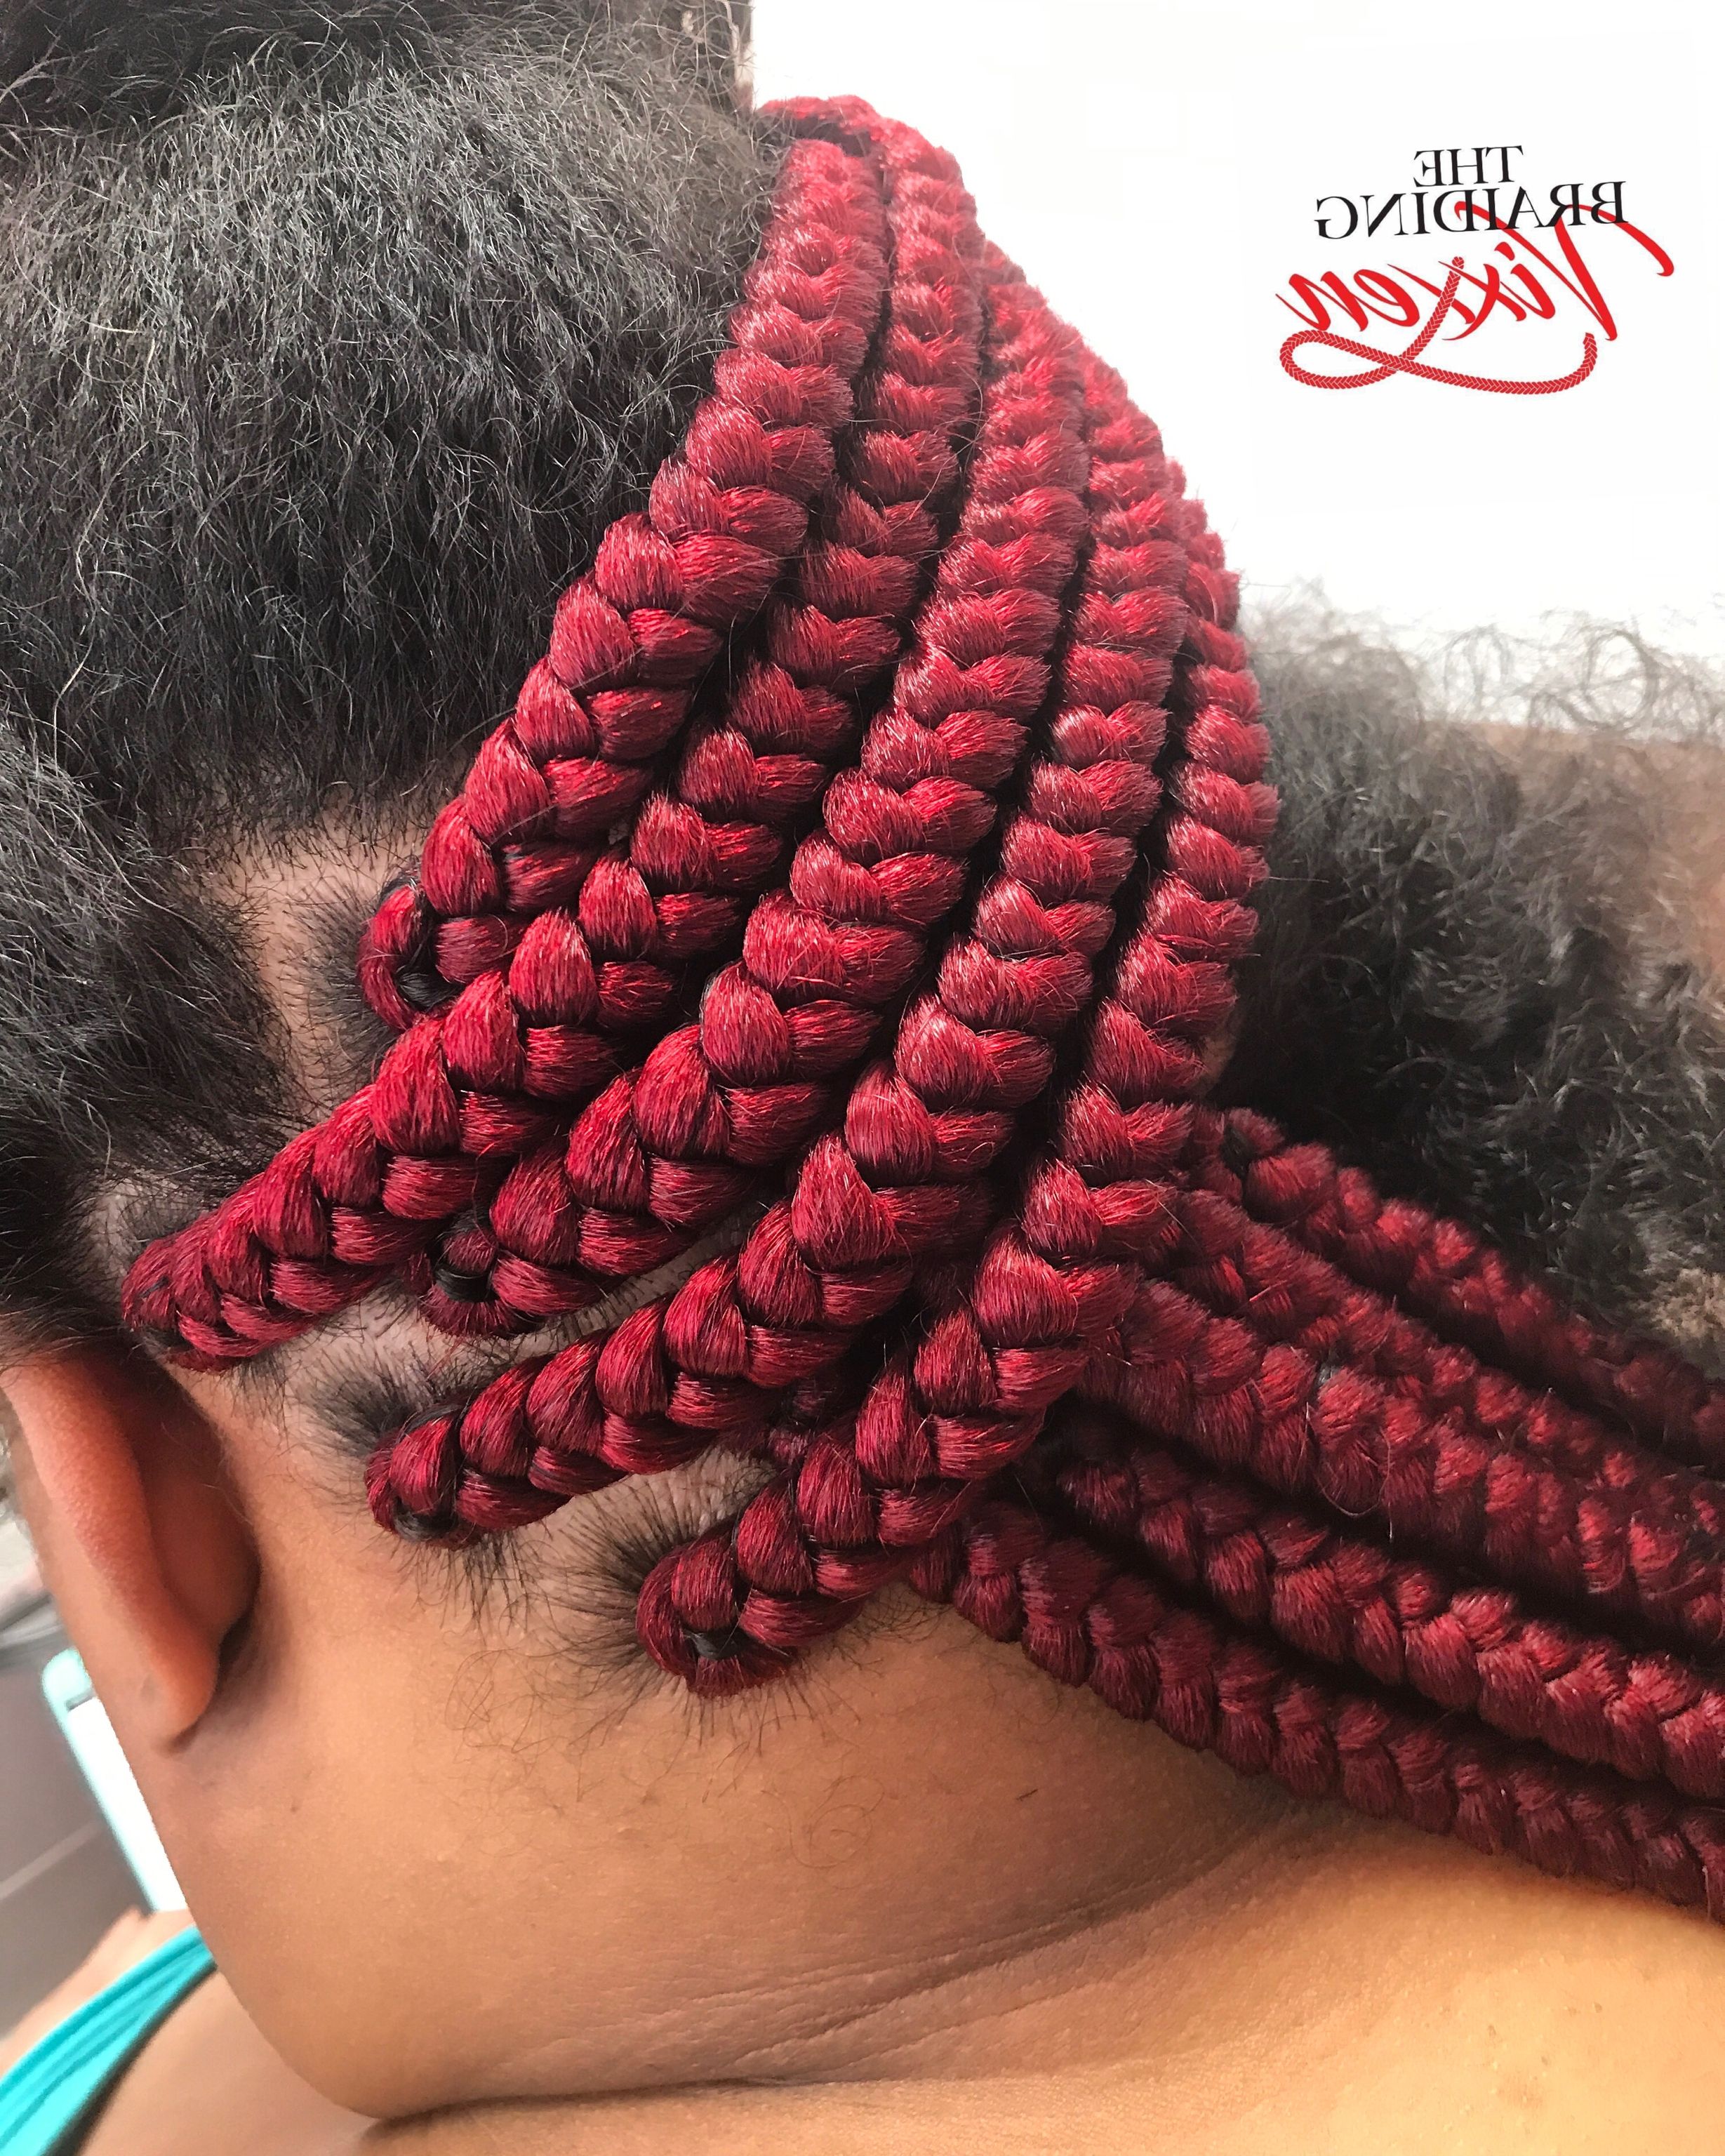 Pinterest For Current Thin Black Box Braids With Burgundy Highlights (View 14 of 15)